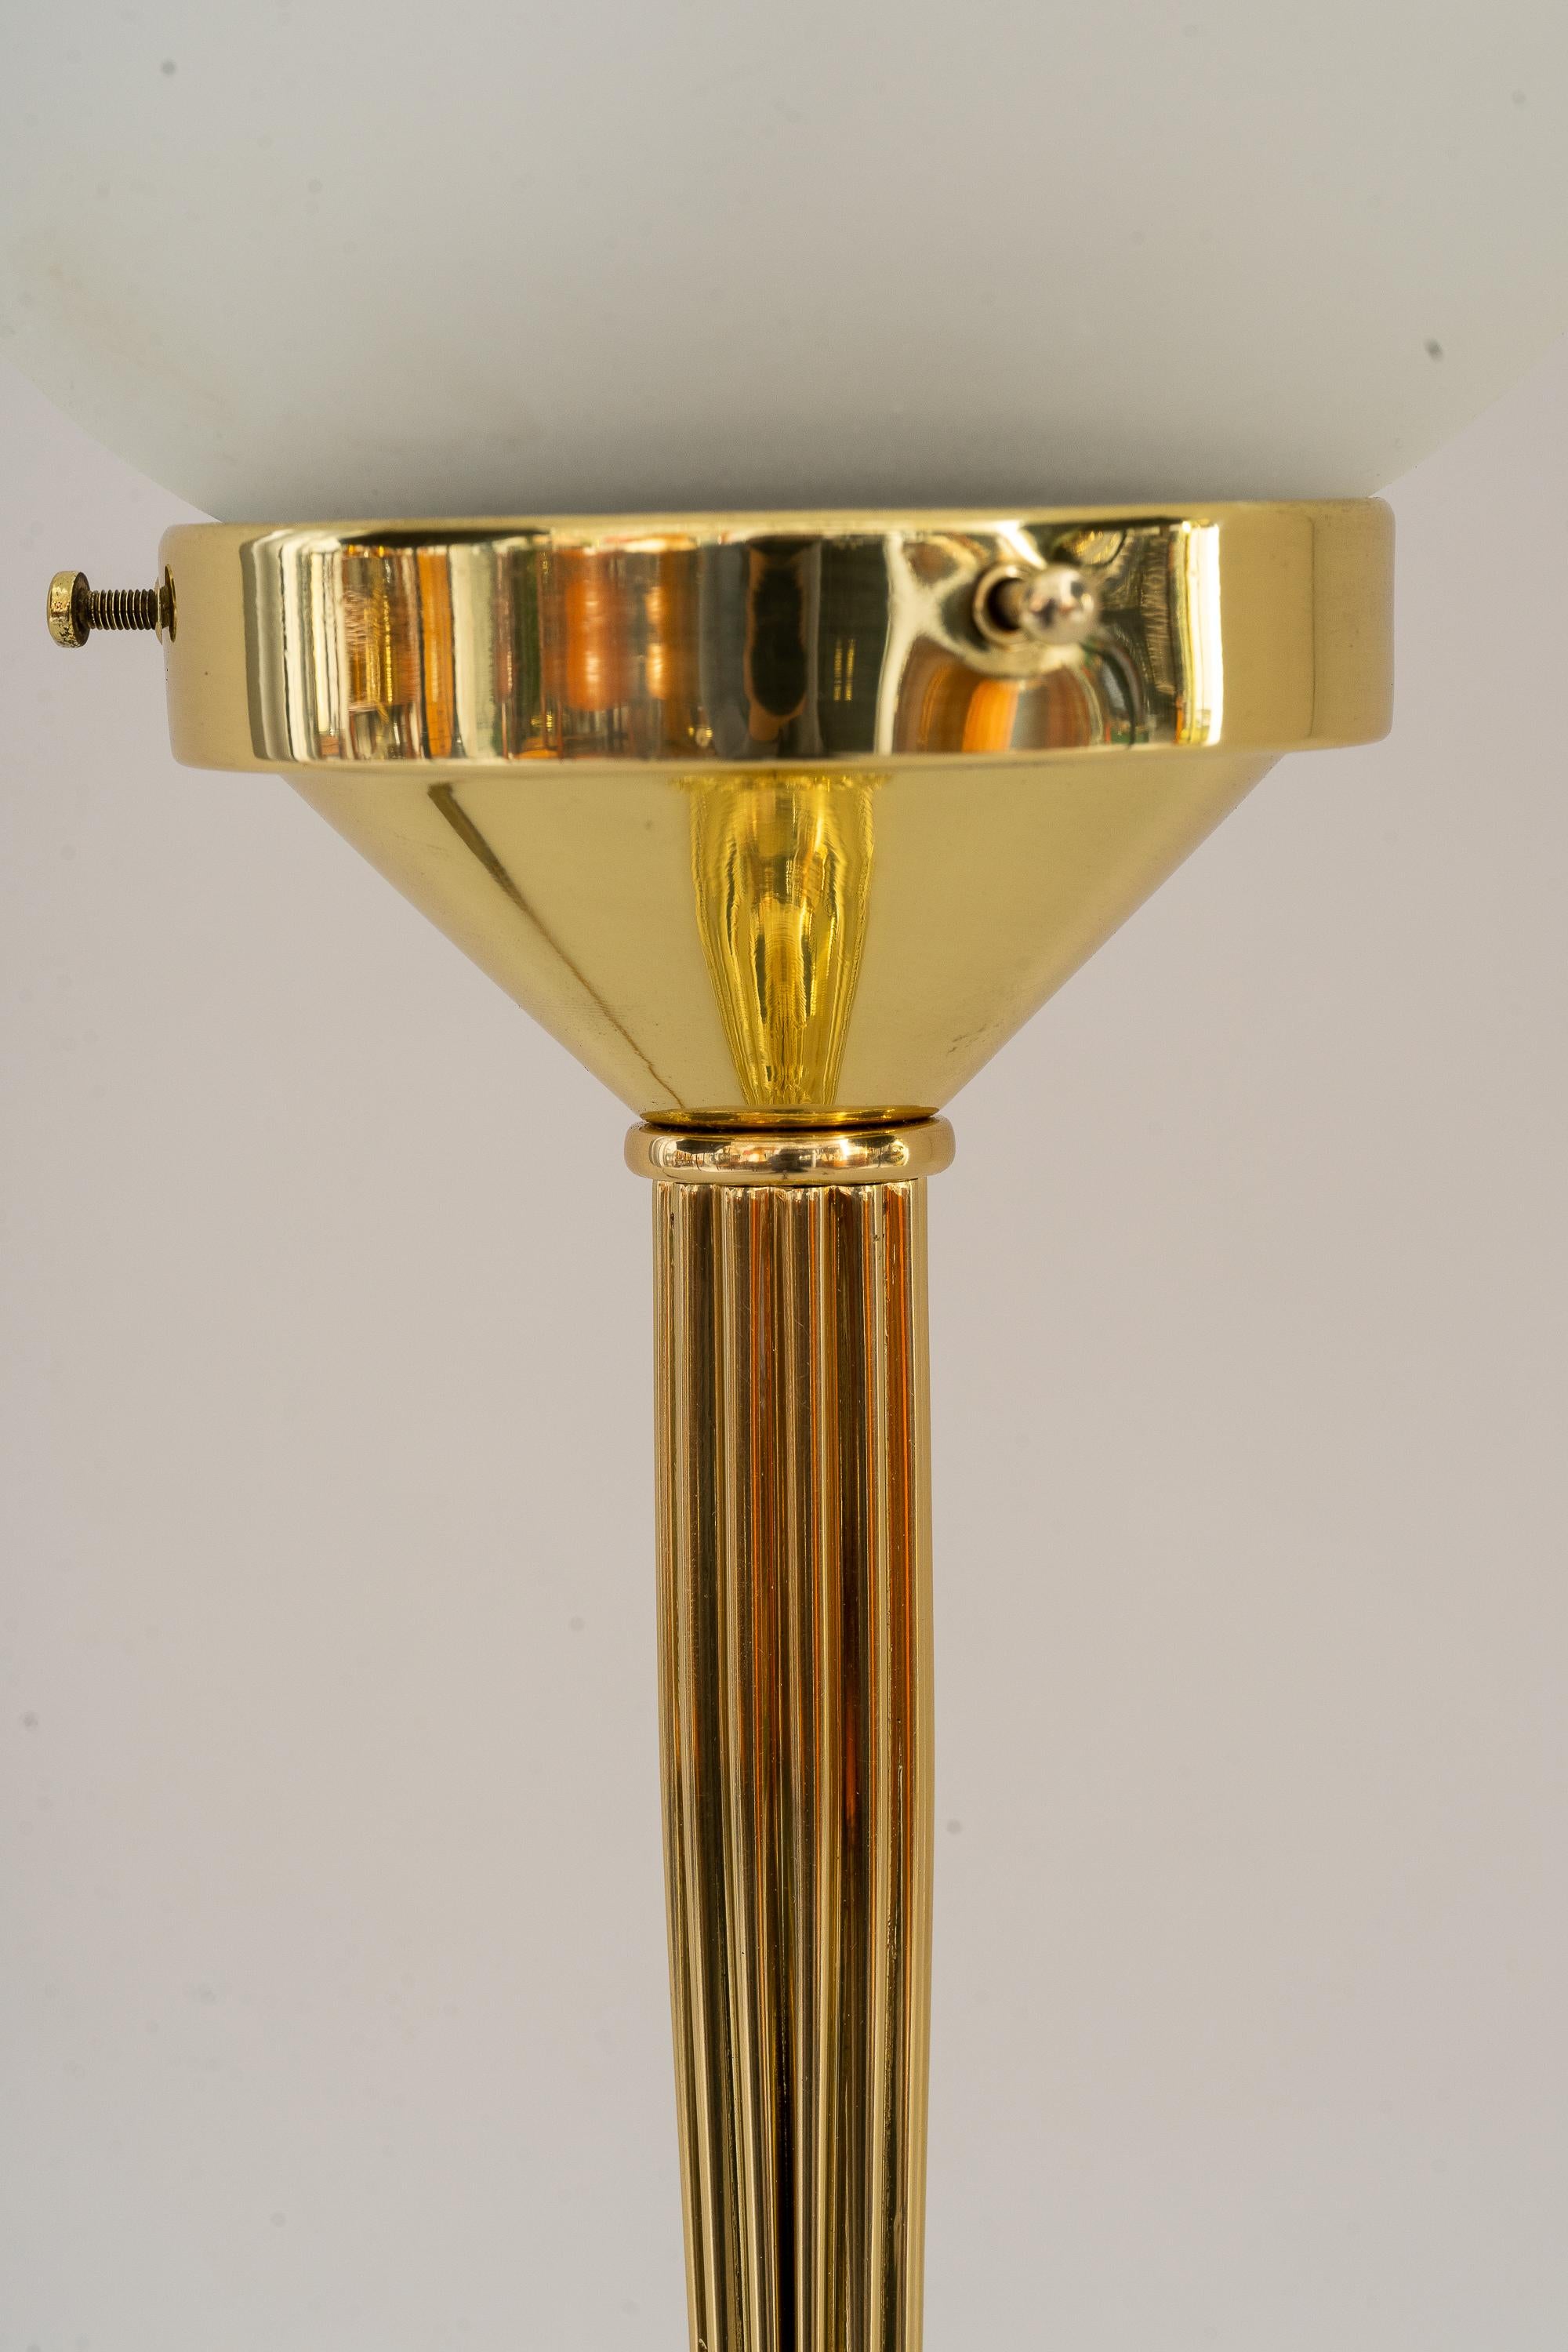 Brass Art Deco Table Lamp with Original Glass Shade Around 1920s